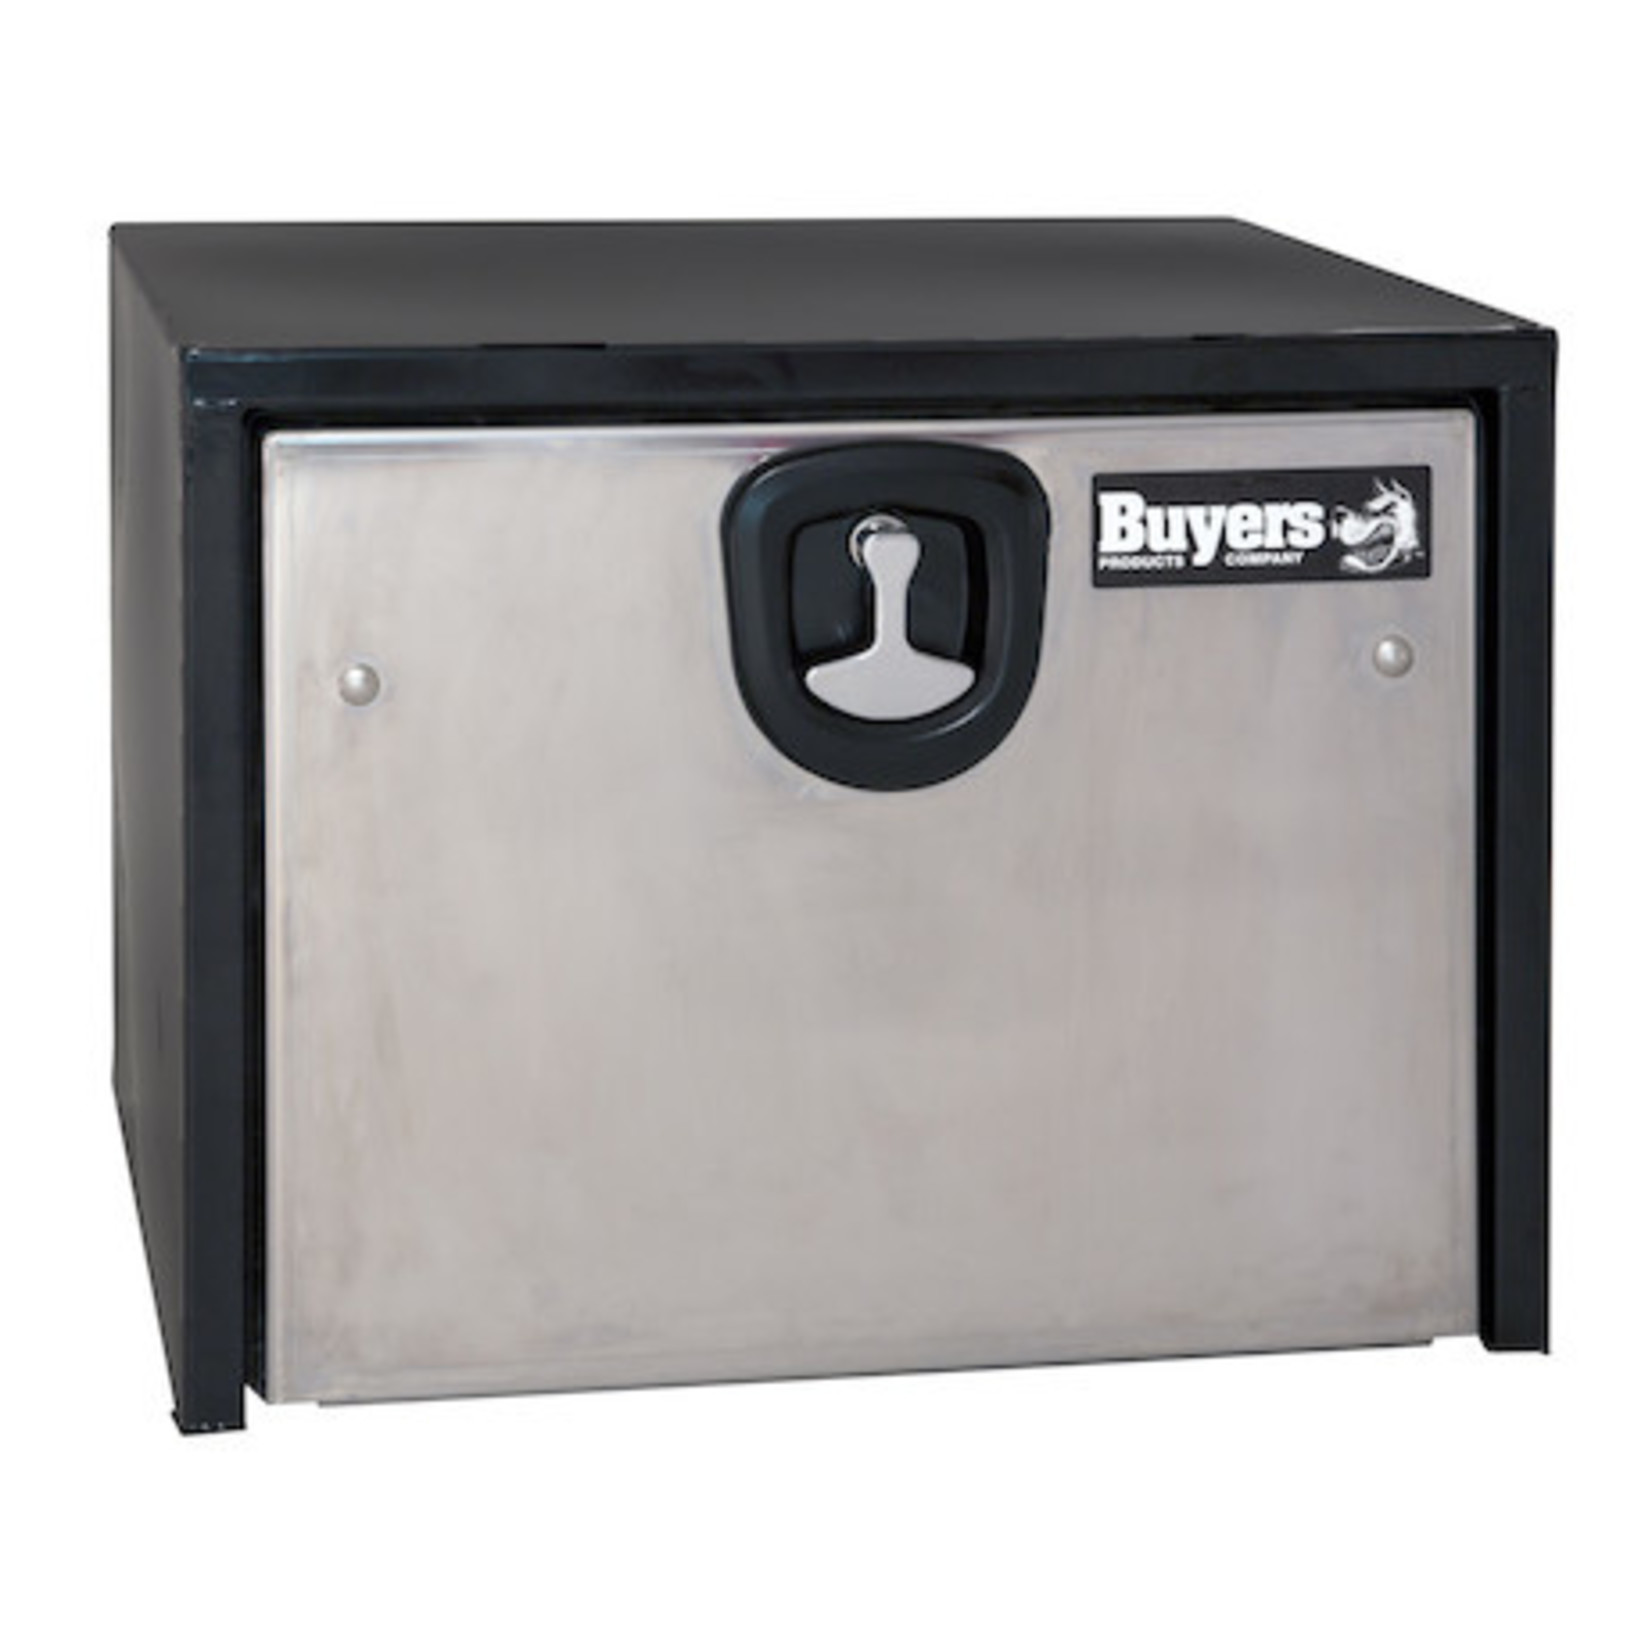 Buyers Products Company Black Steel Underbody Truck Box with Stainless Steel Door Series